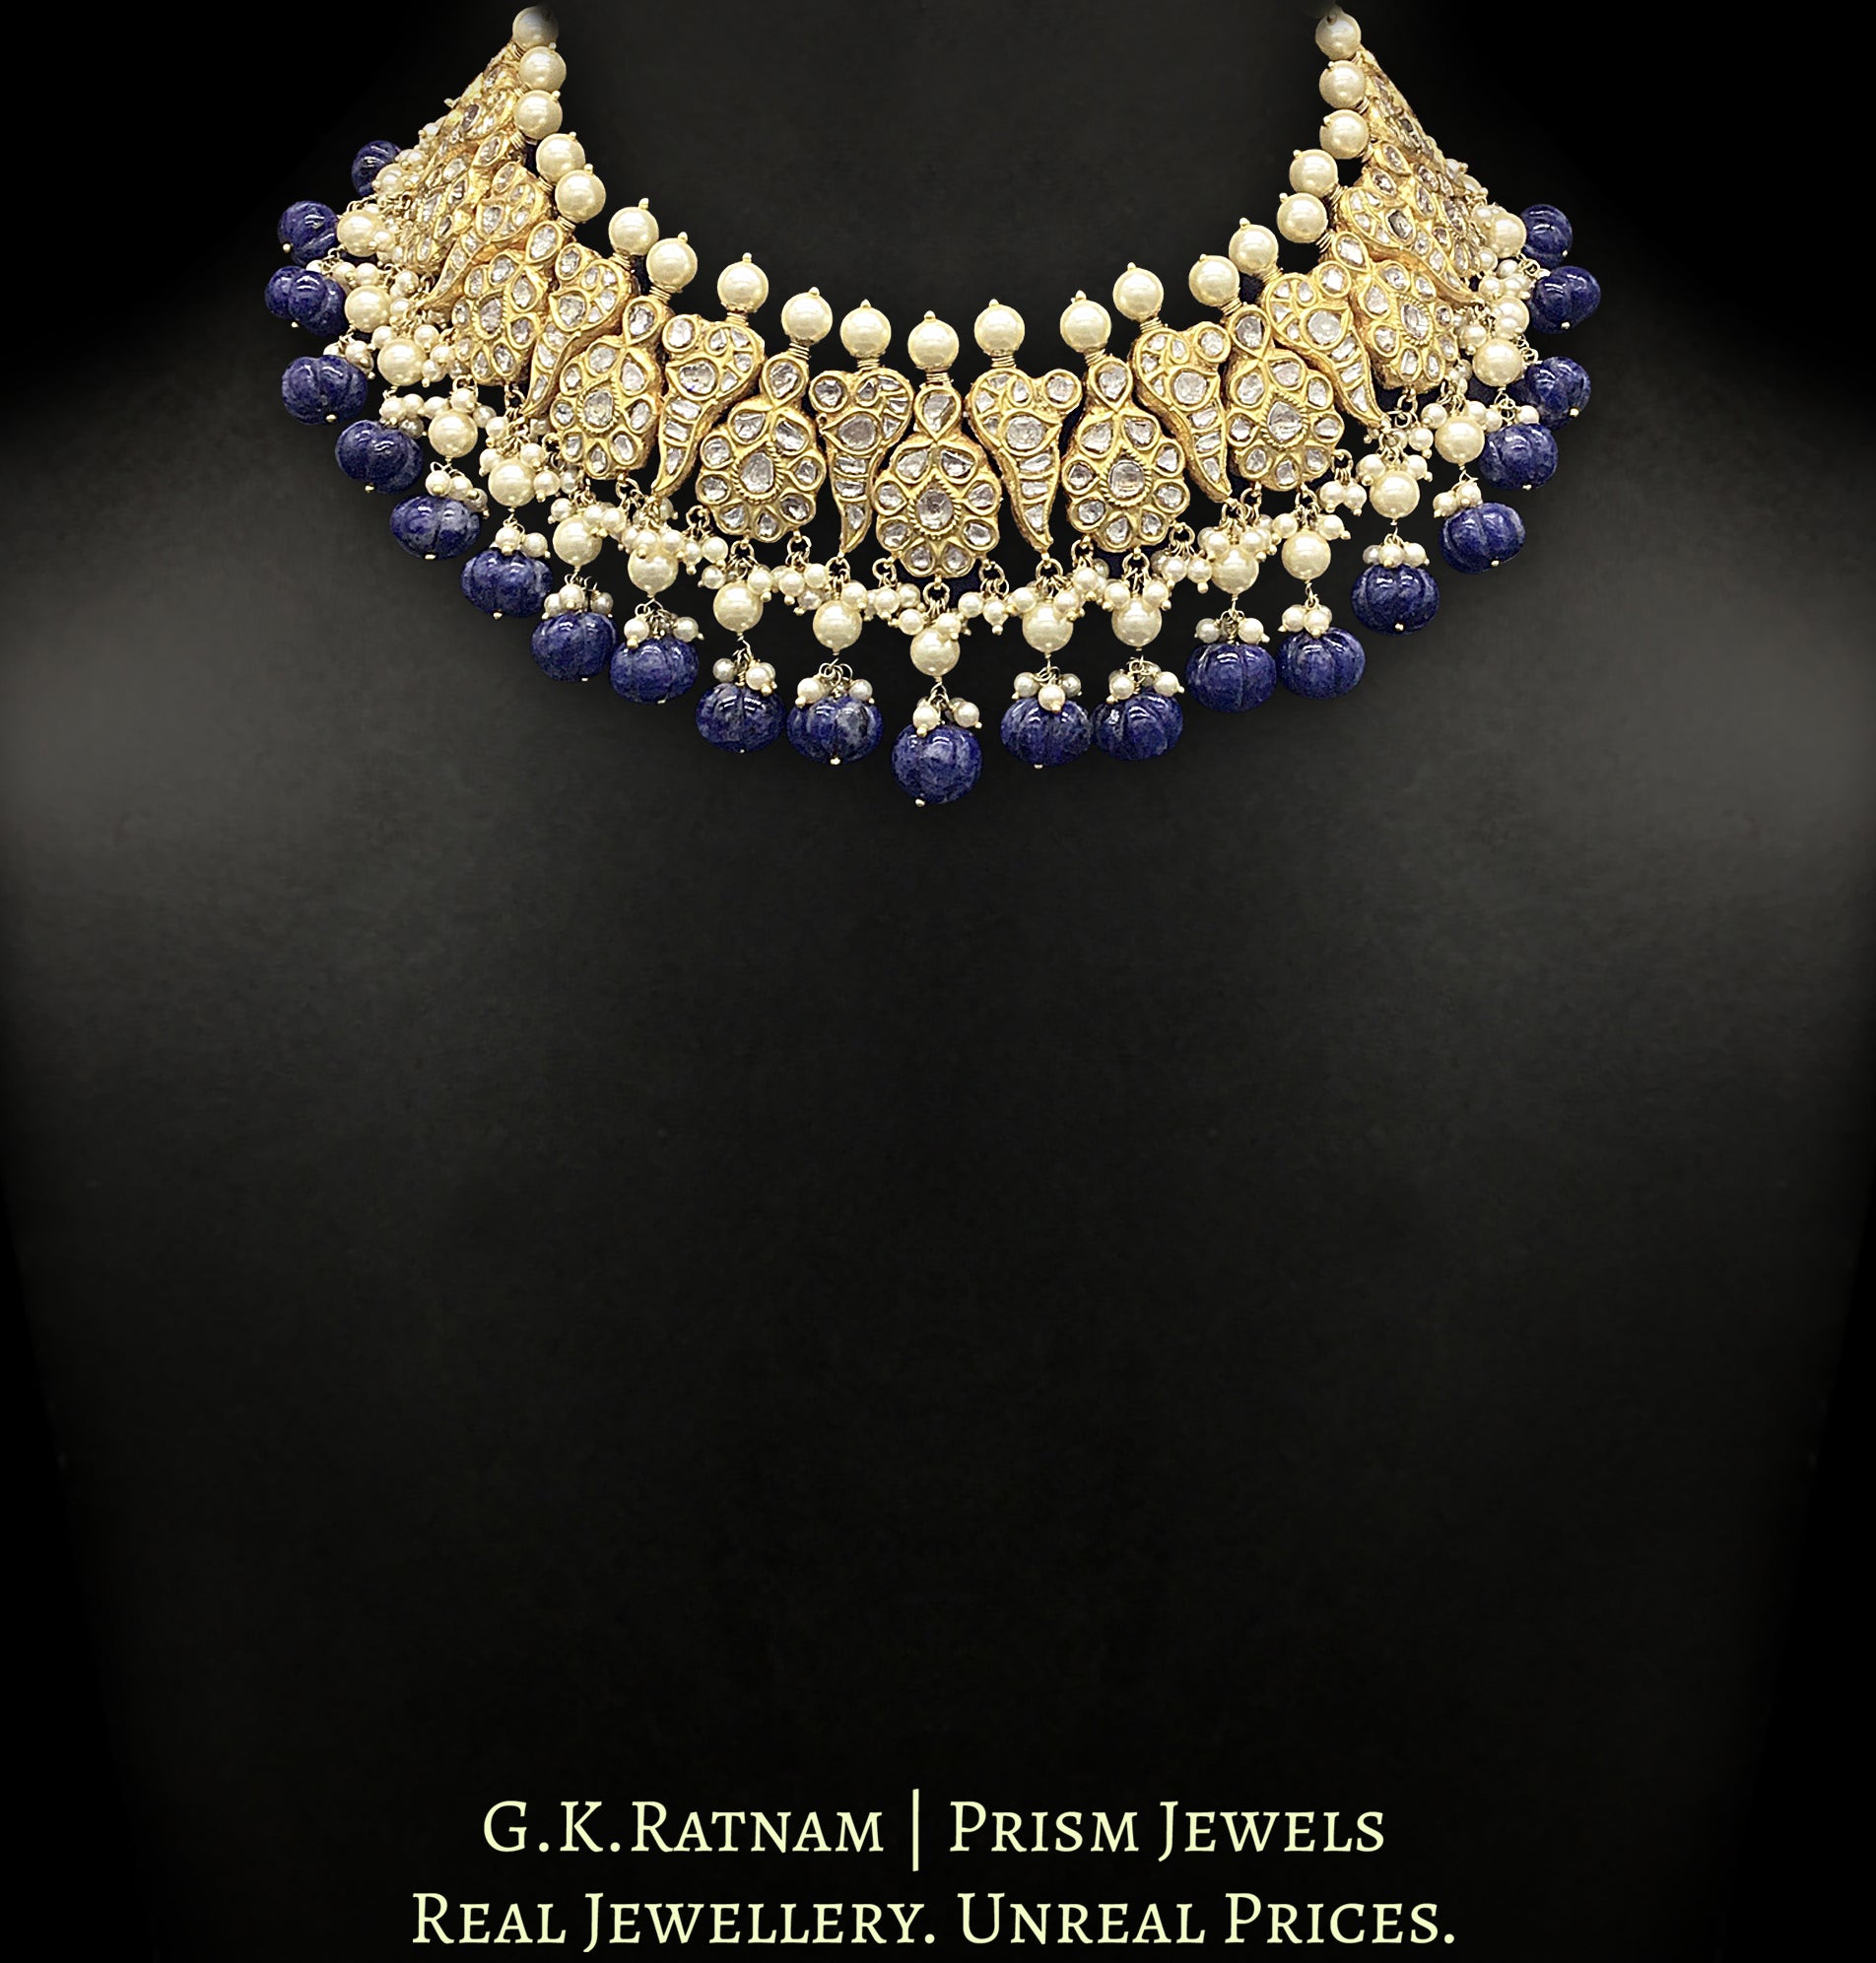 23k Gold and Diamond Polki Peacock (mor) Necklace with Carved Sodalite Melons